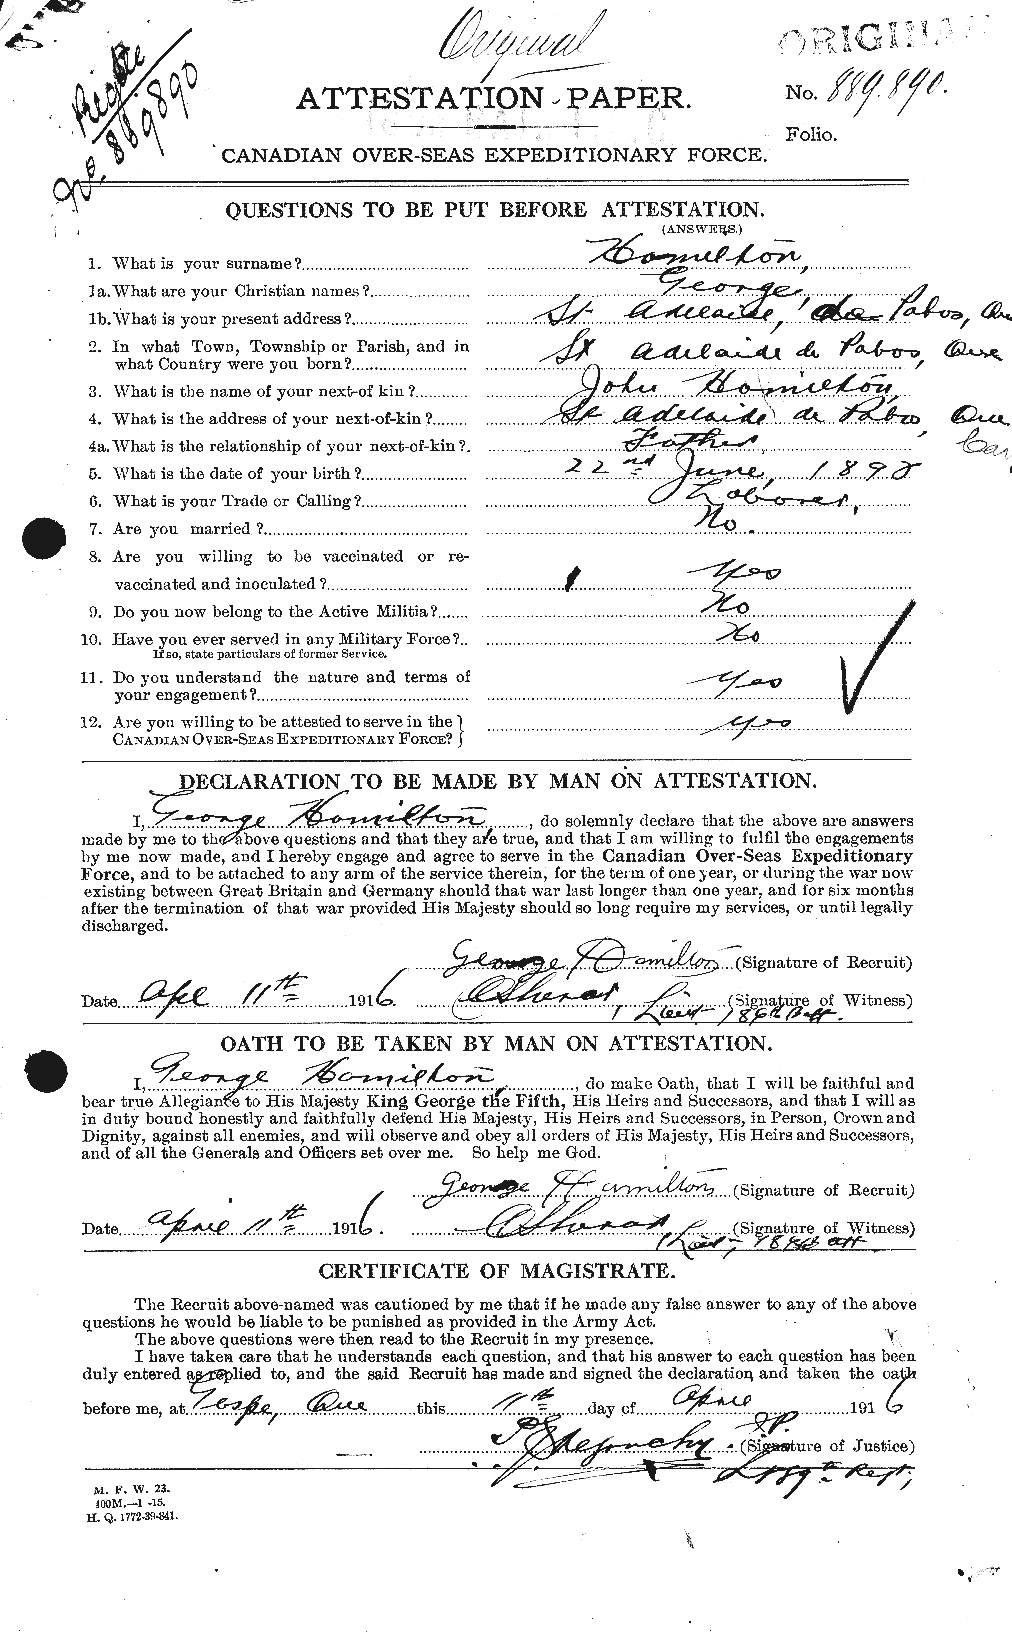 Personnel Records of the First World War - CEF 372441a